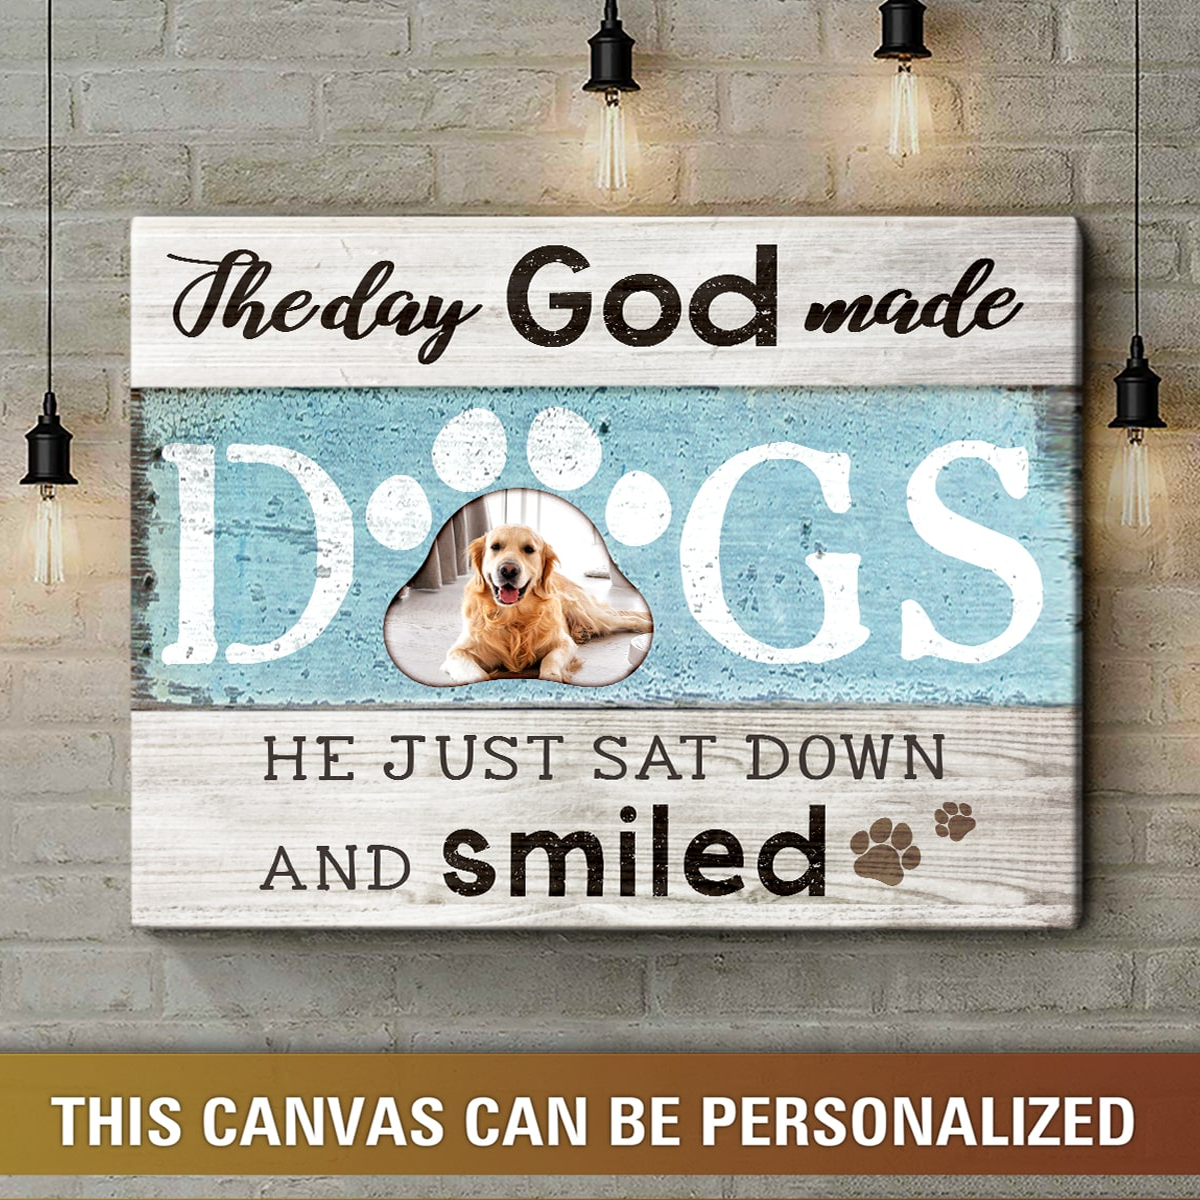 Personalized Dog Canvas, Custom Dog Gifts The Day God Made Dogs Sweet Dog Saying Canvas, Perfect Gift For Dog Lovers, Friend, Family